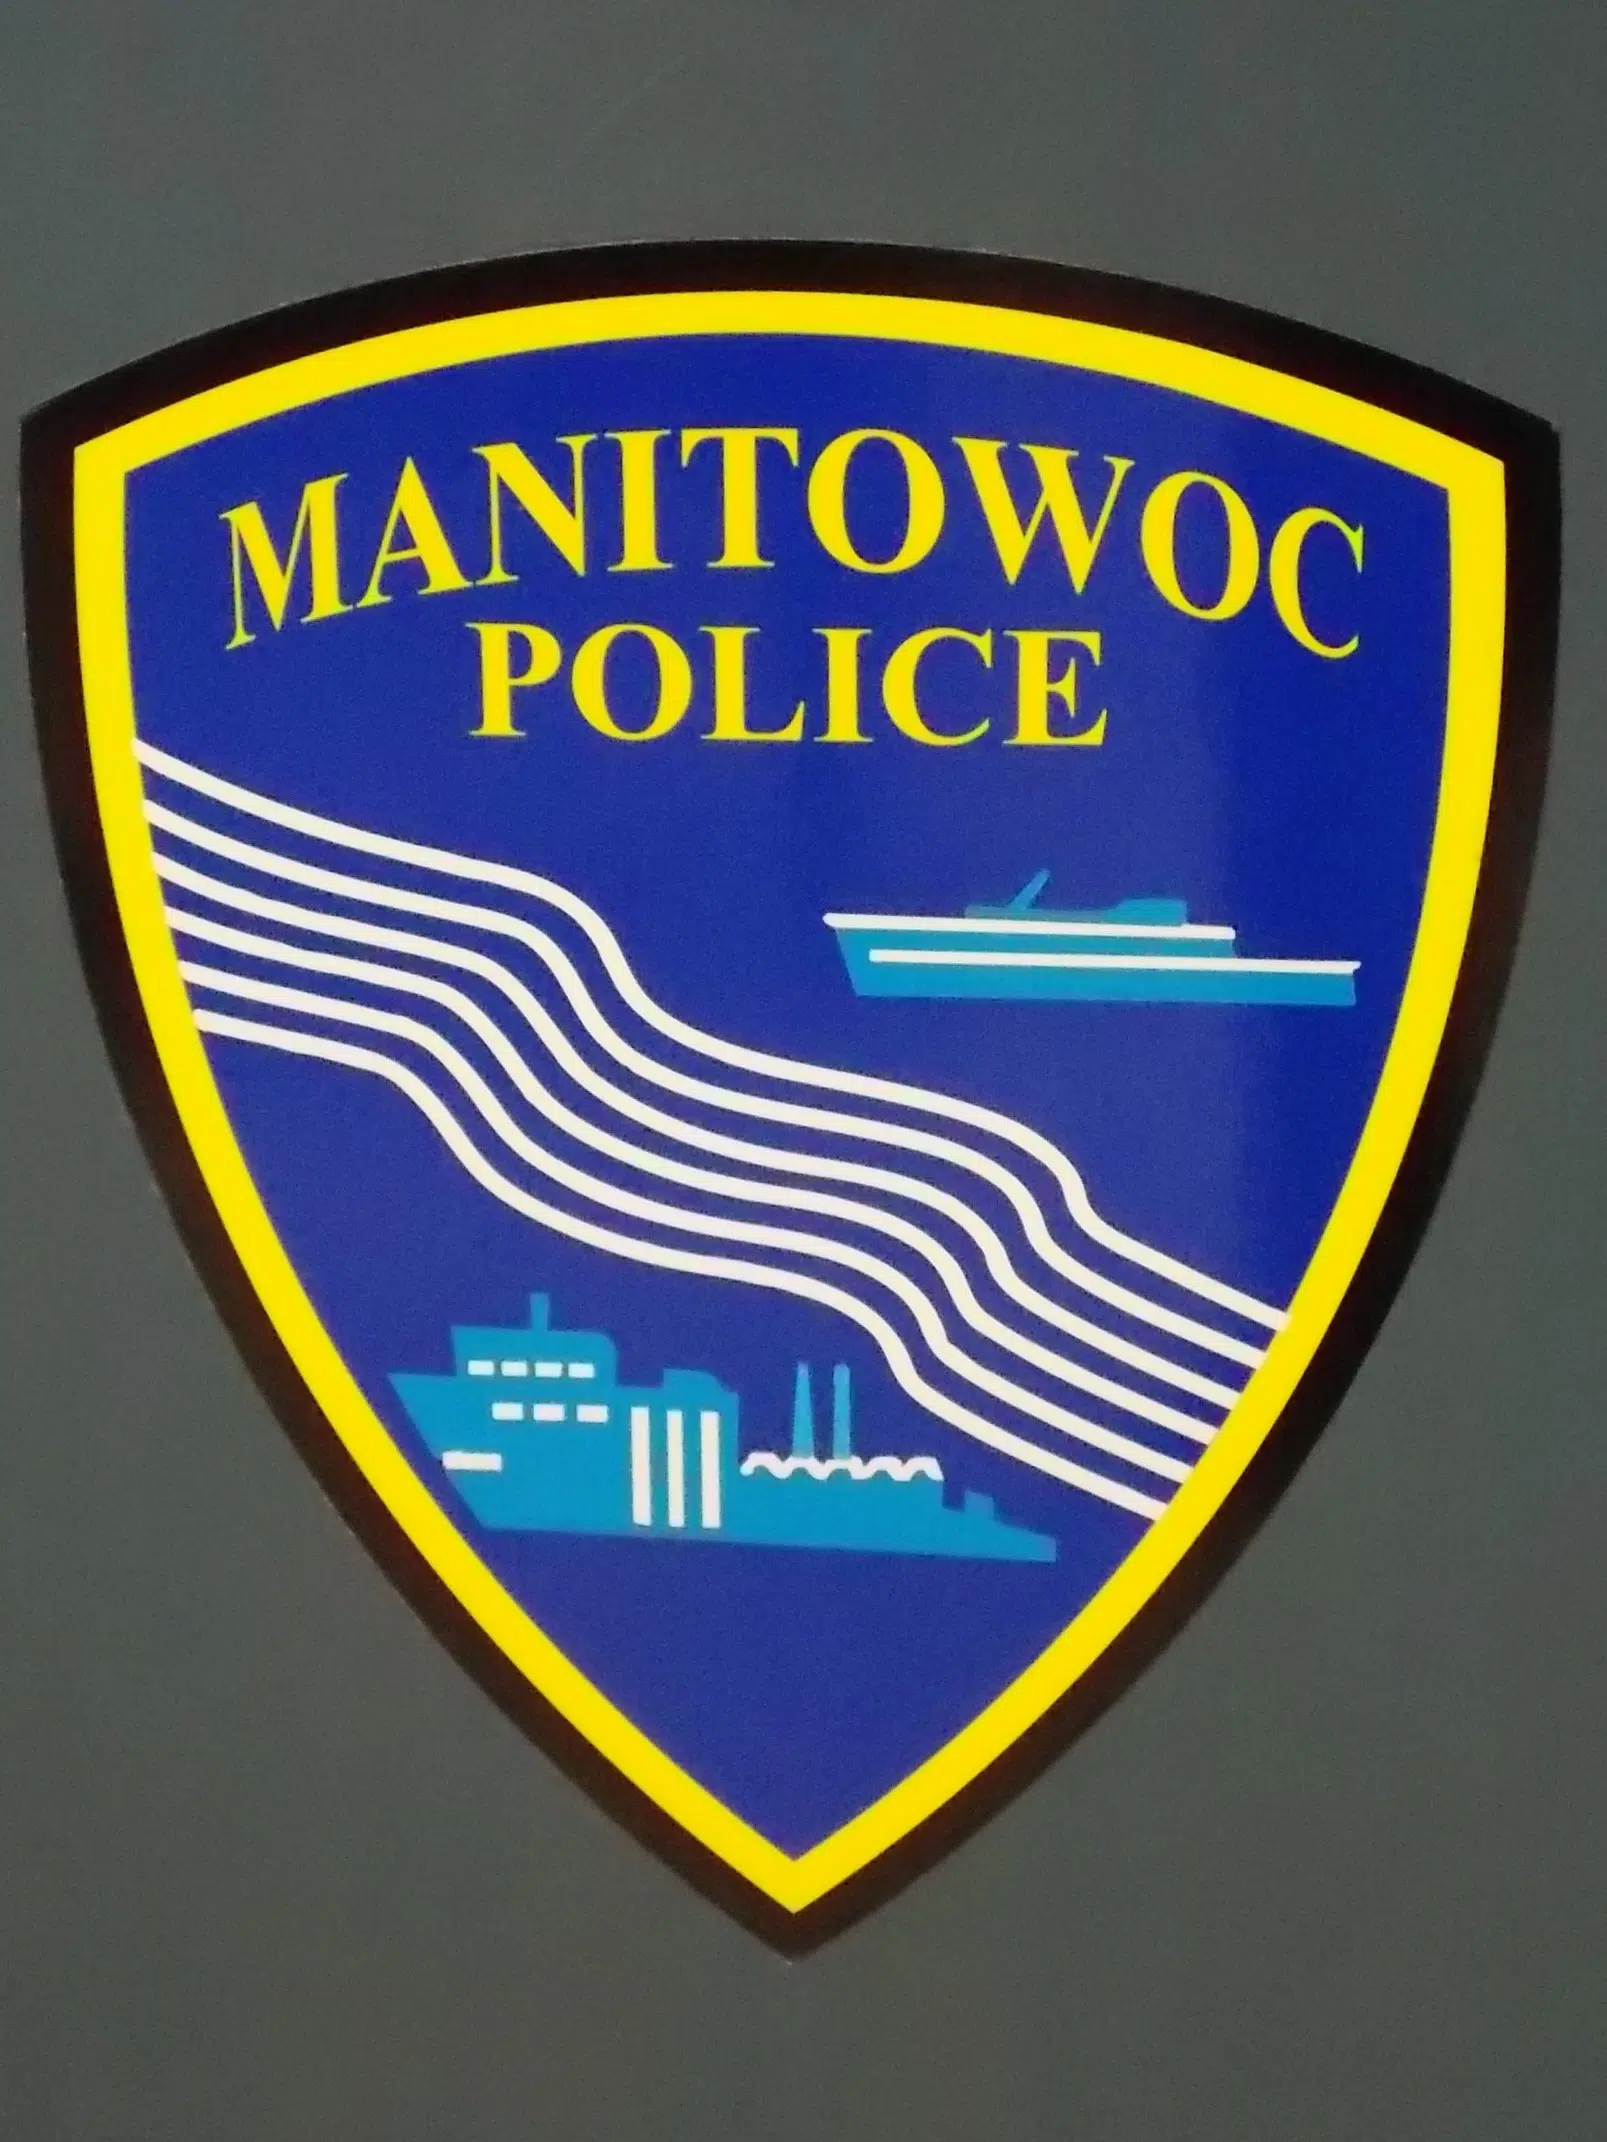 Manitowoc Police Chief Reminds All to Stay Safe This Summer